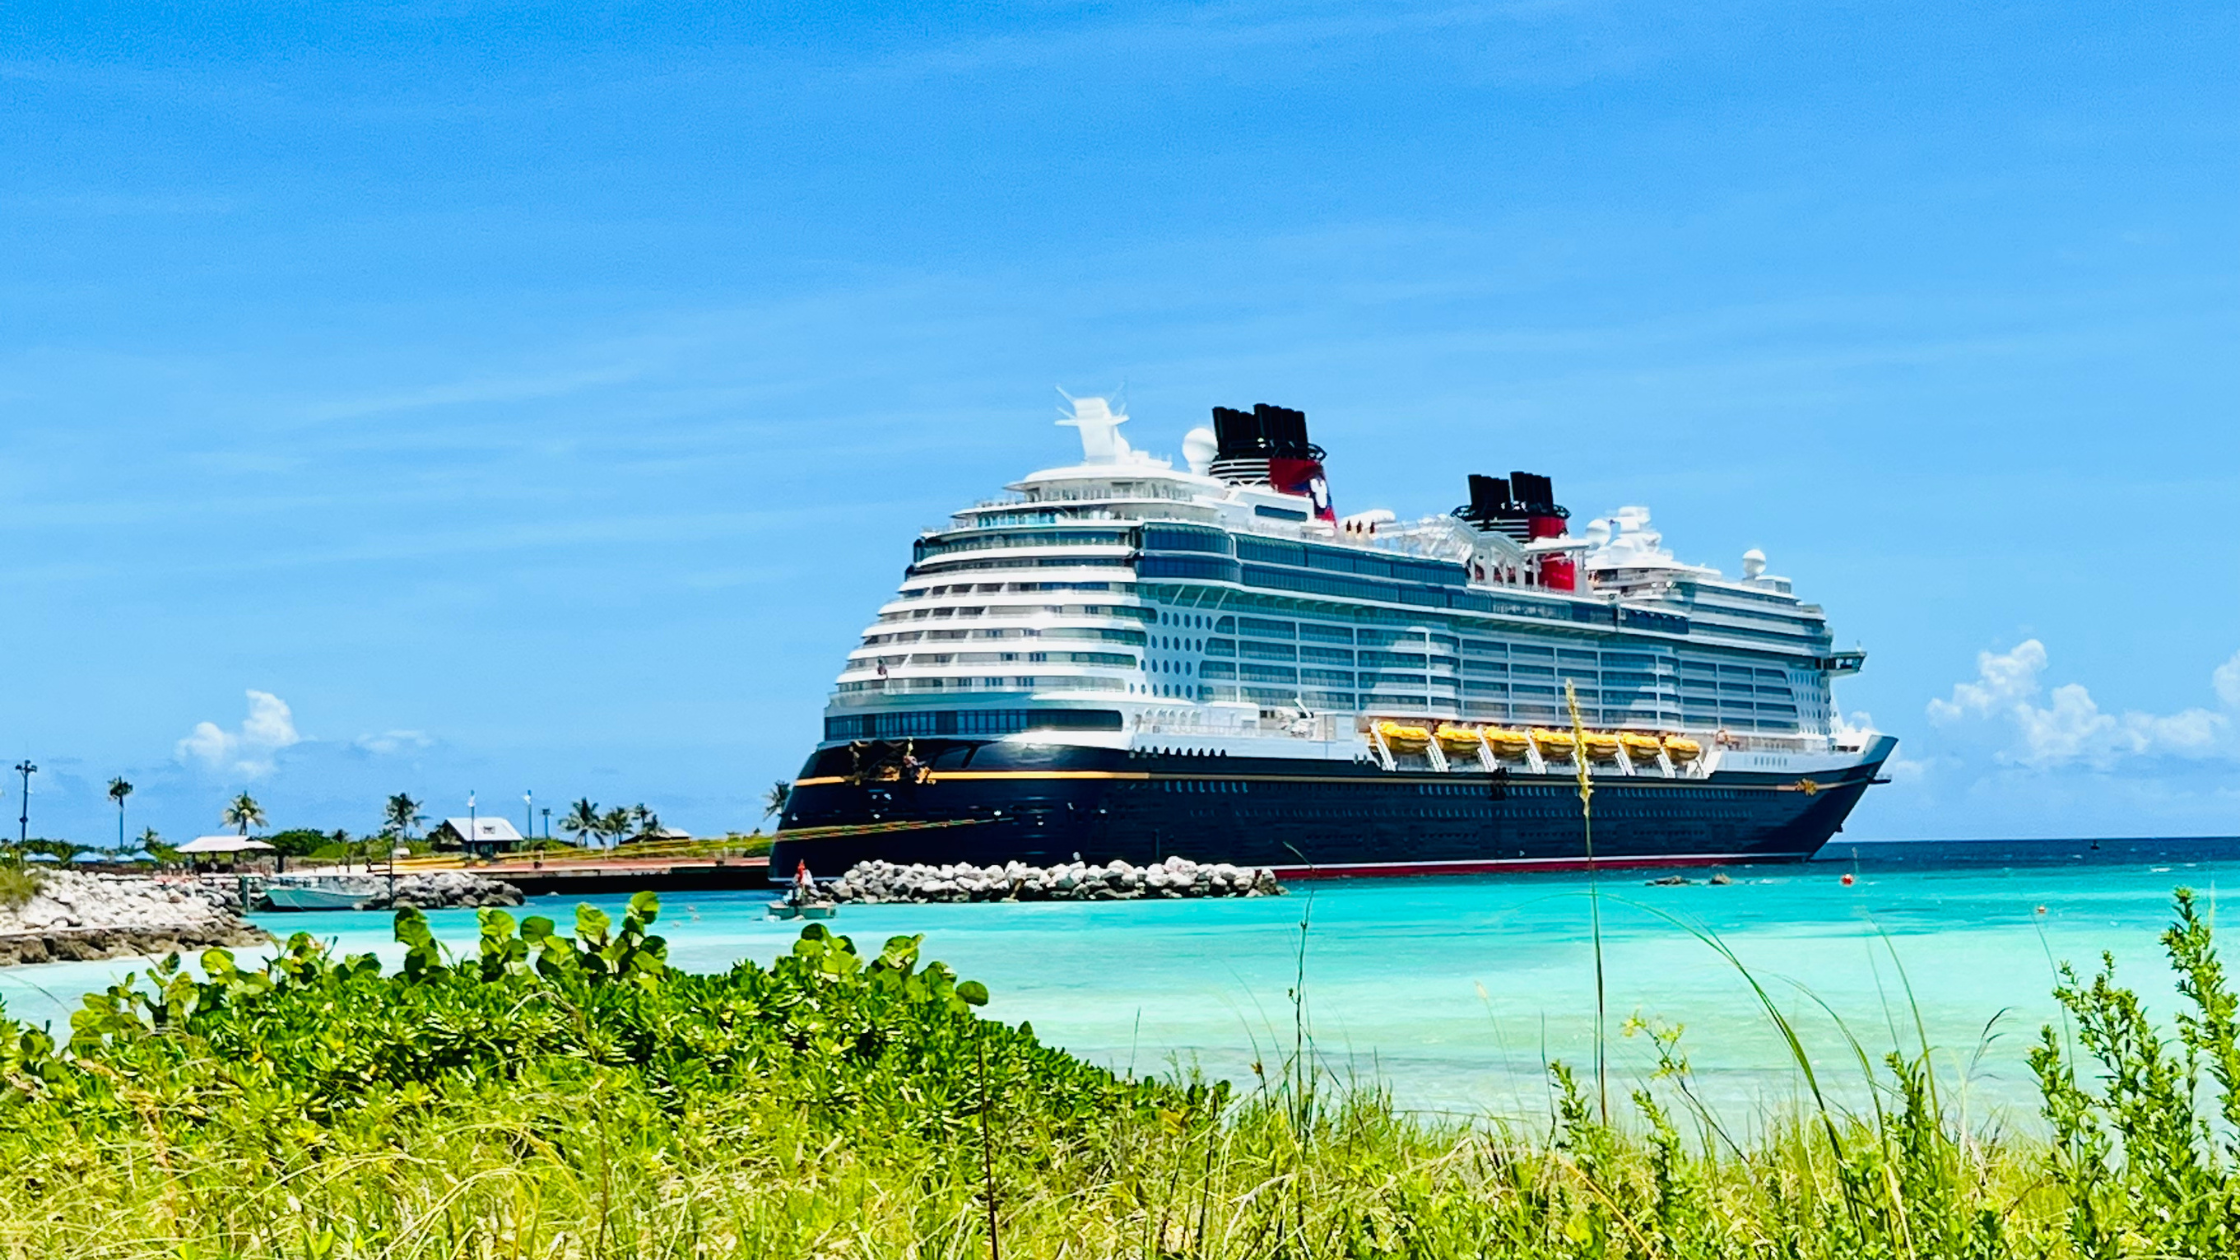 The new Disney Wish: The world's most magical cruise ship (PHOTOS